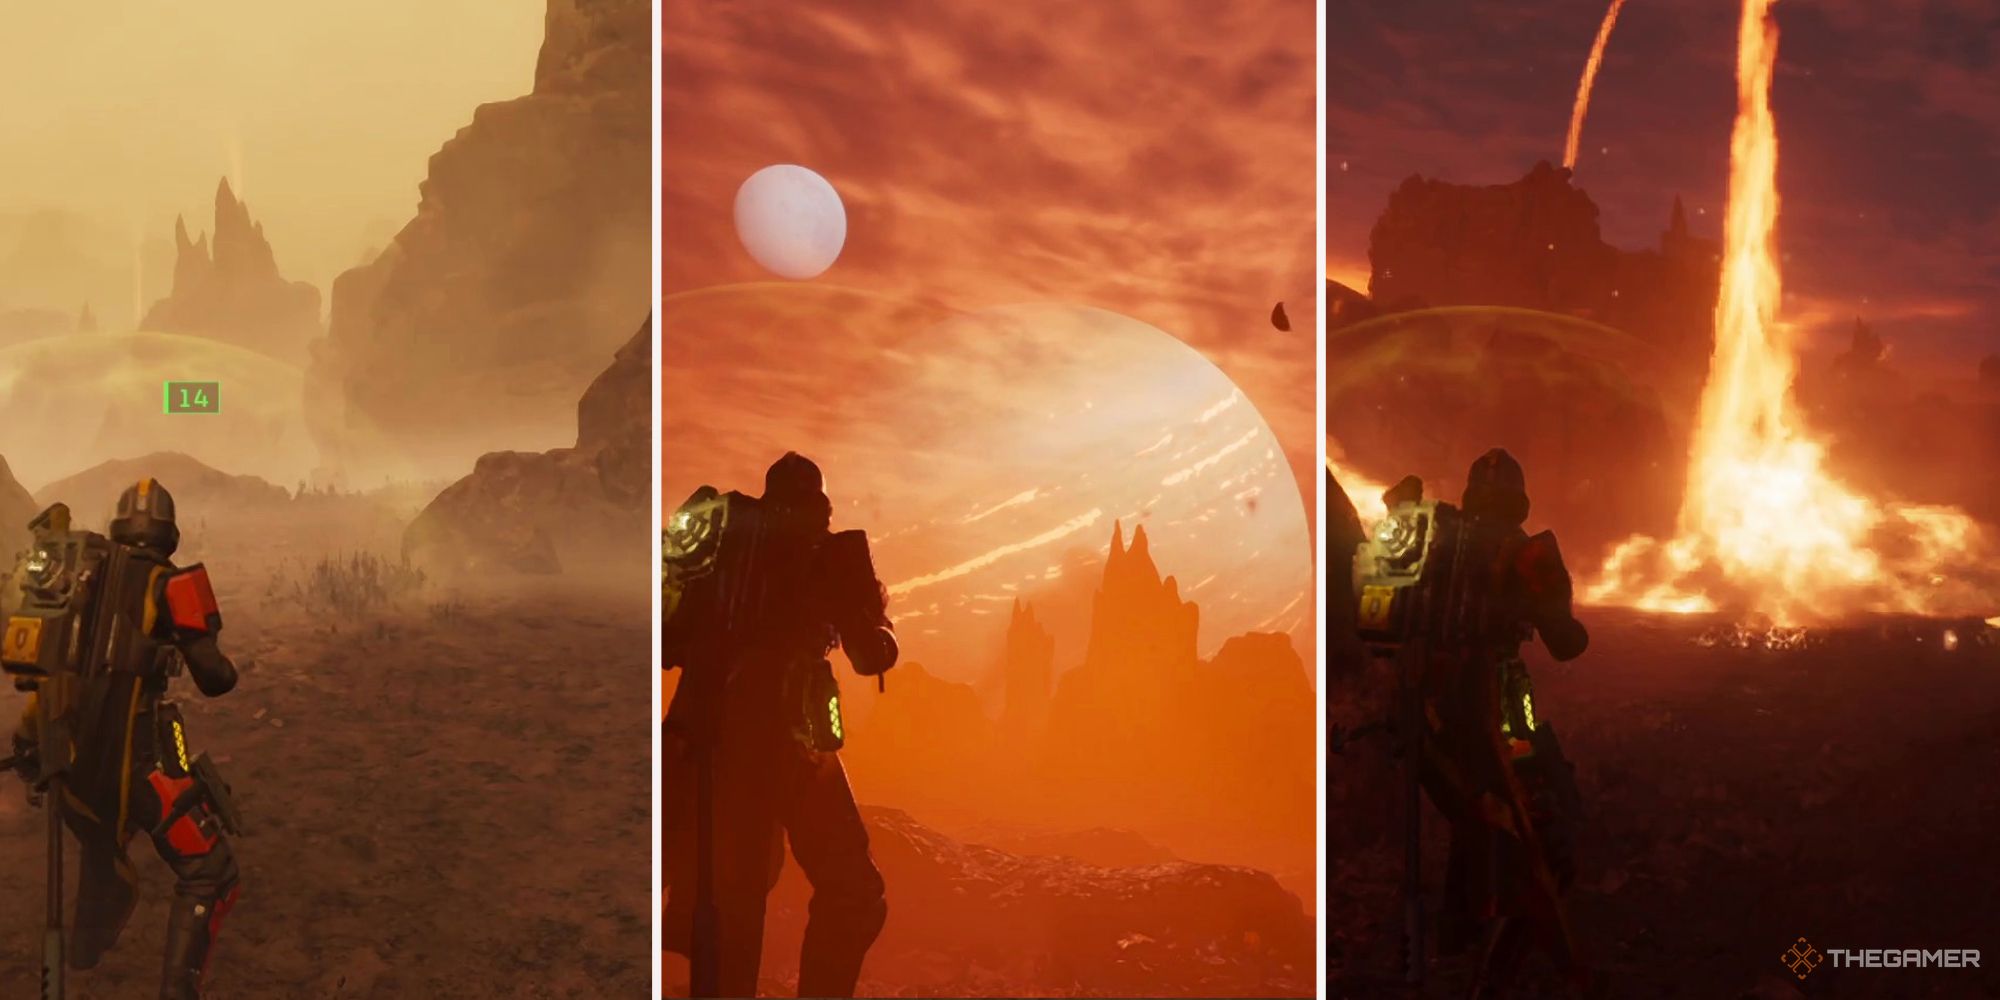 Several scenes from the fiery and rocky planet Hellmire.